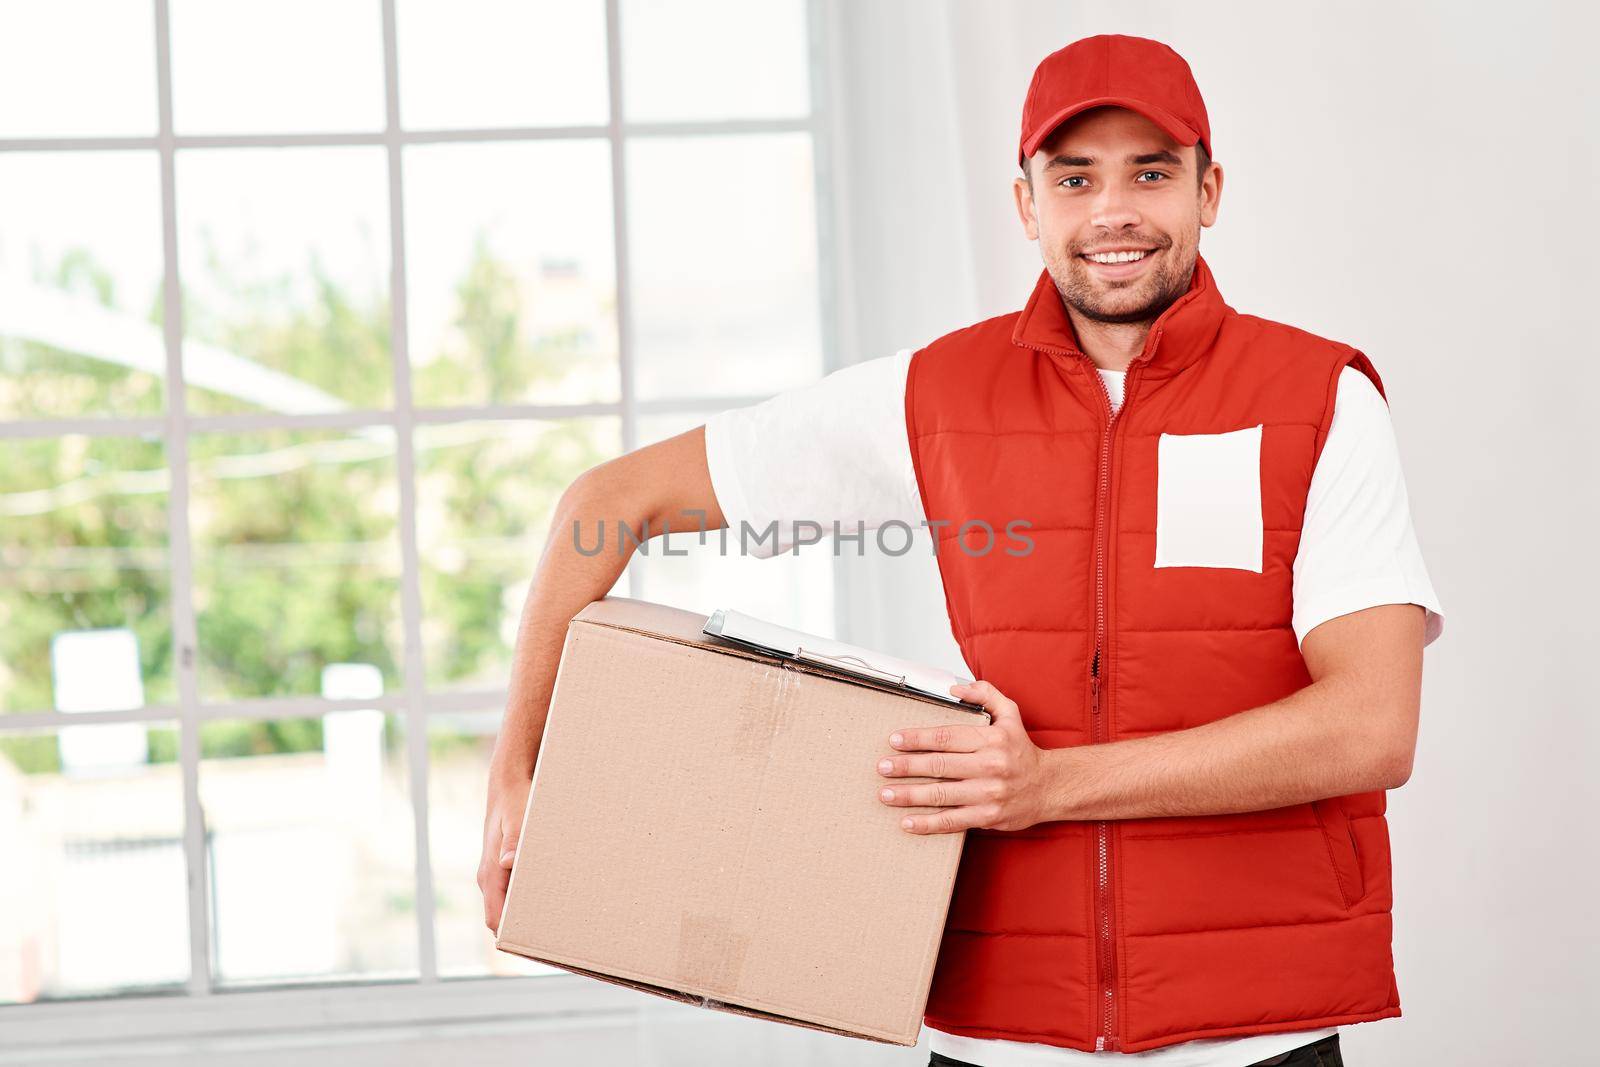 Cheerful postman wearing red postal uniform is delivering parcel to a client. He holds carton box and looking at the camera with a smile. Friendly worker, high quality delivery service. Indoors. Bright interior.